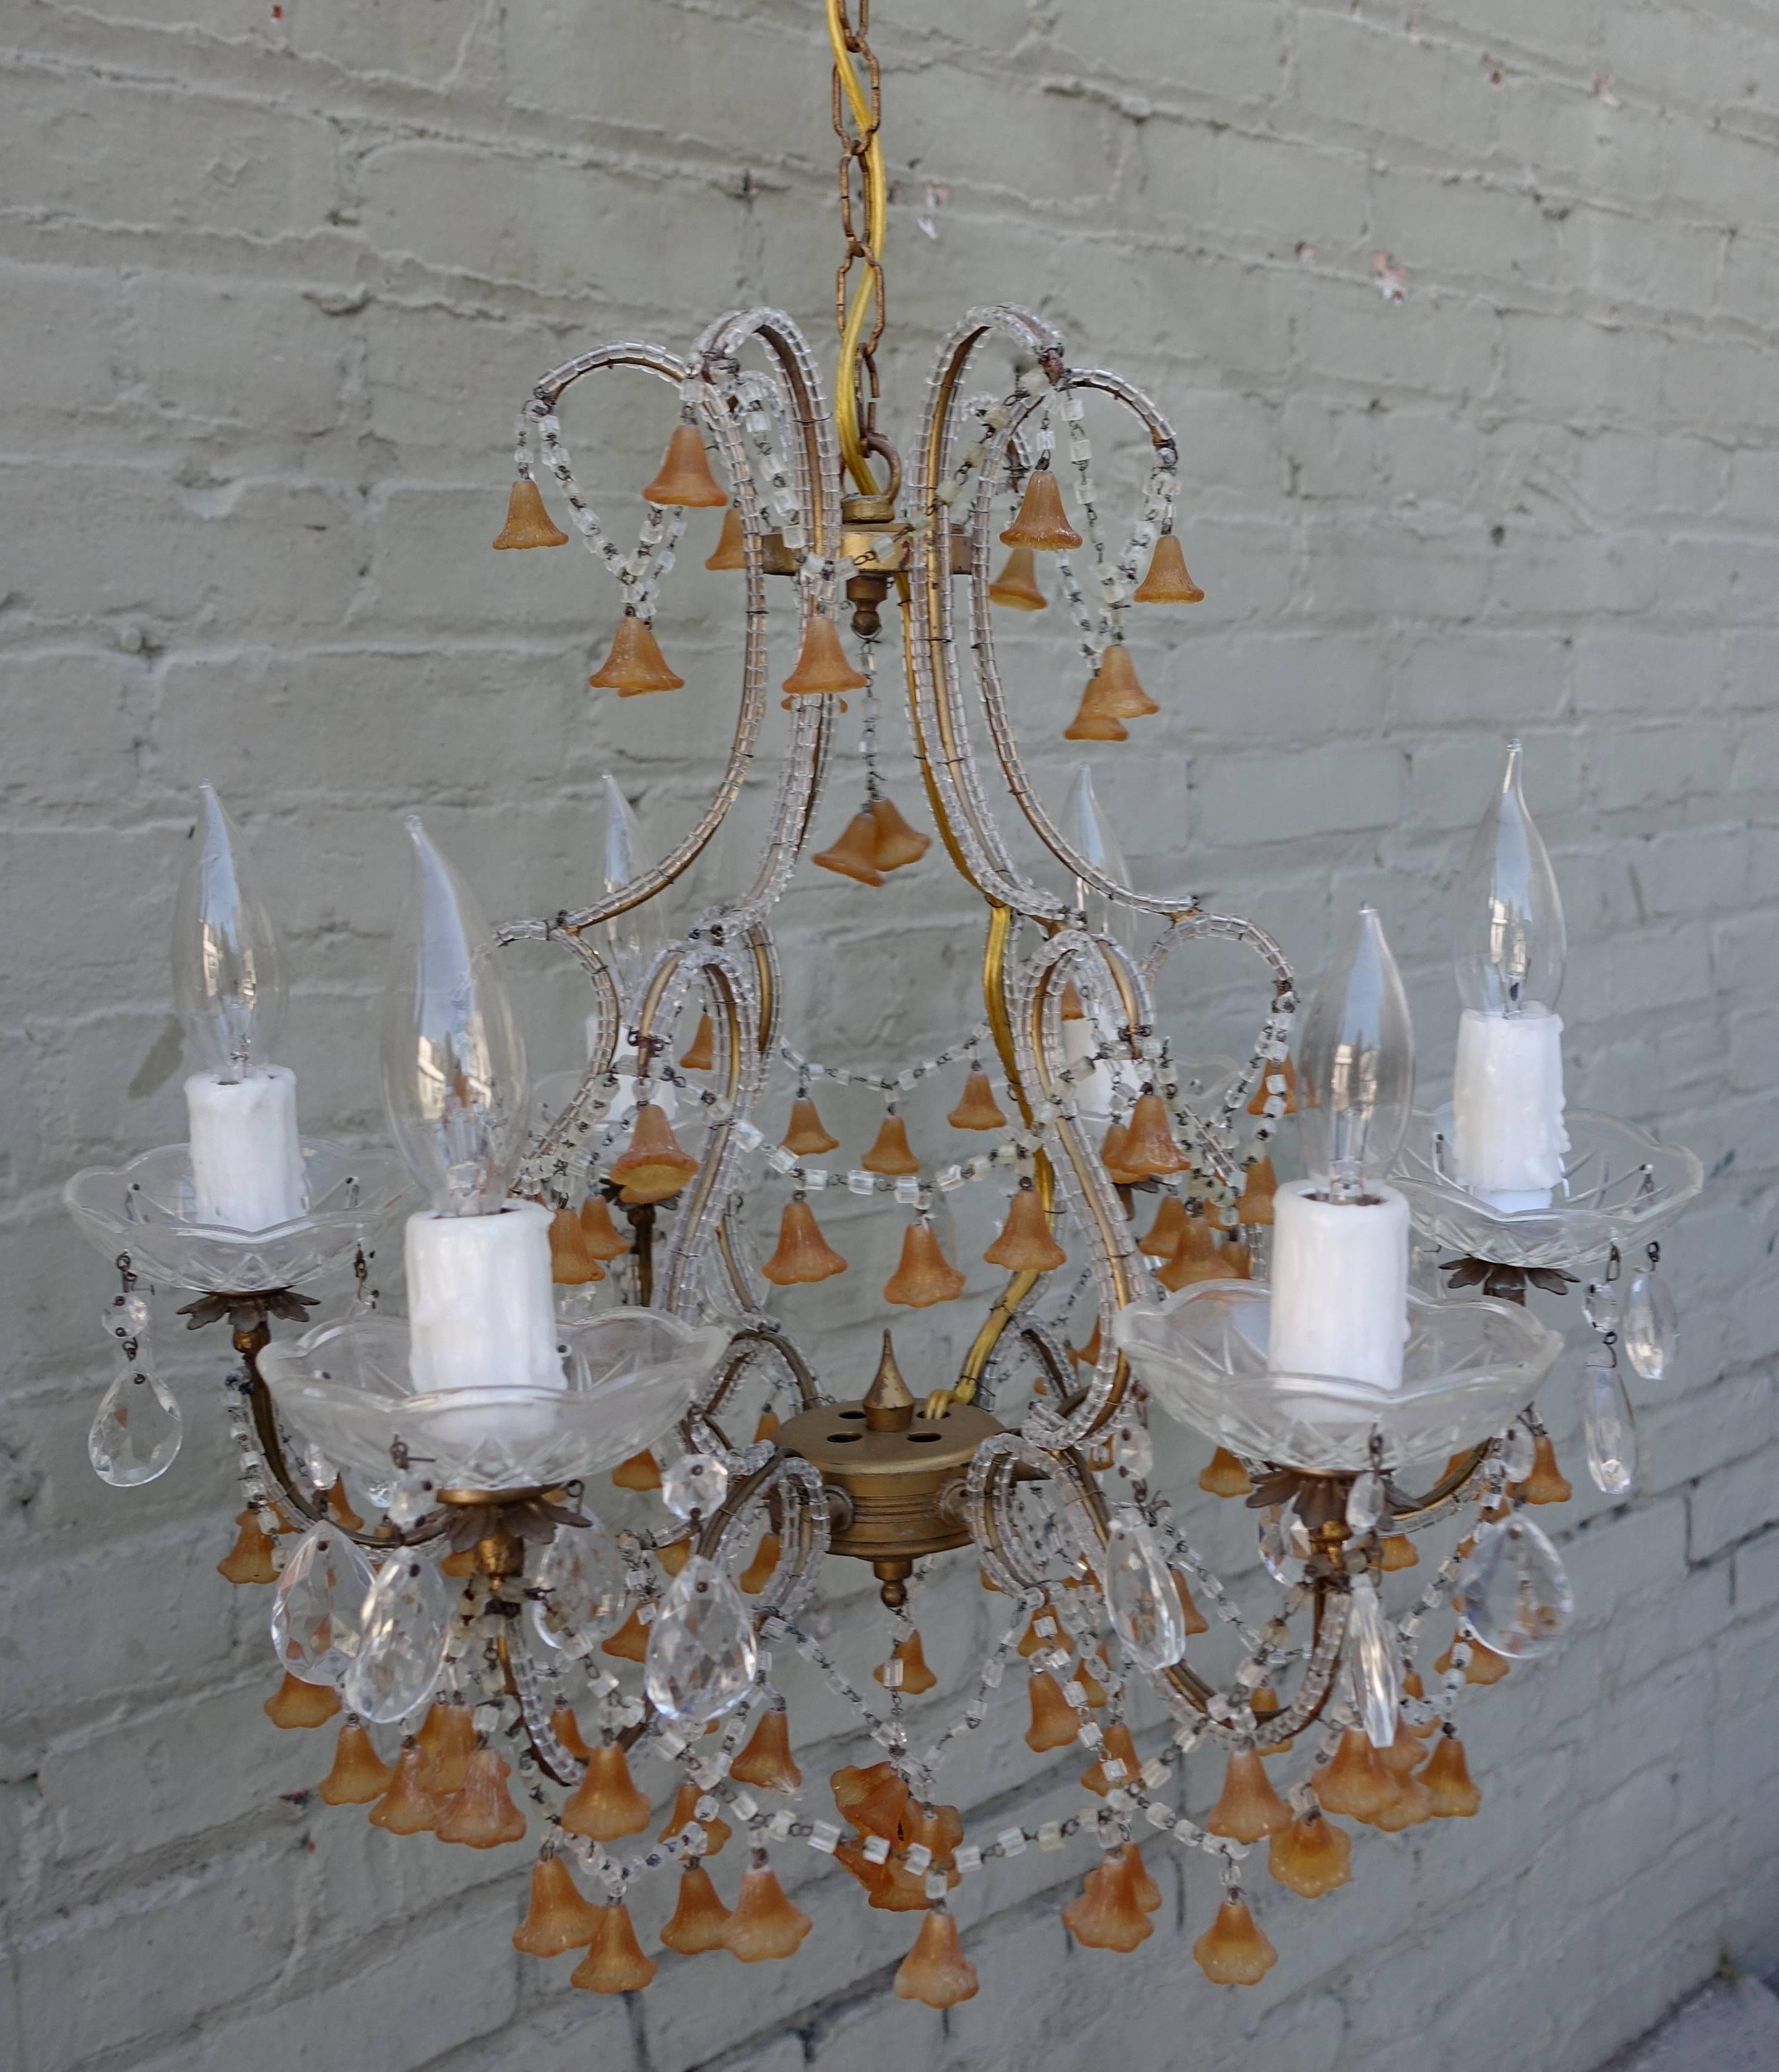 Six-light beaded crystal chandelier with amber Murano handblown hanging bells. Six clear bobeches hold drip wax candleholders. The fixture has been newly wired and includes chain and canopy.